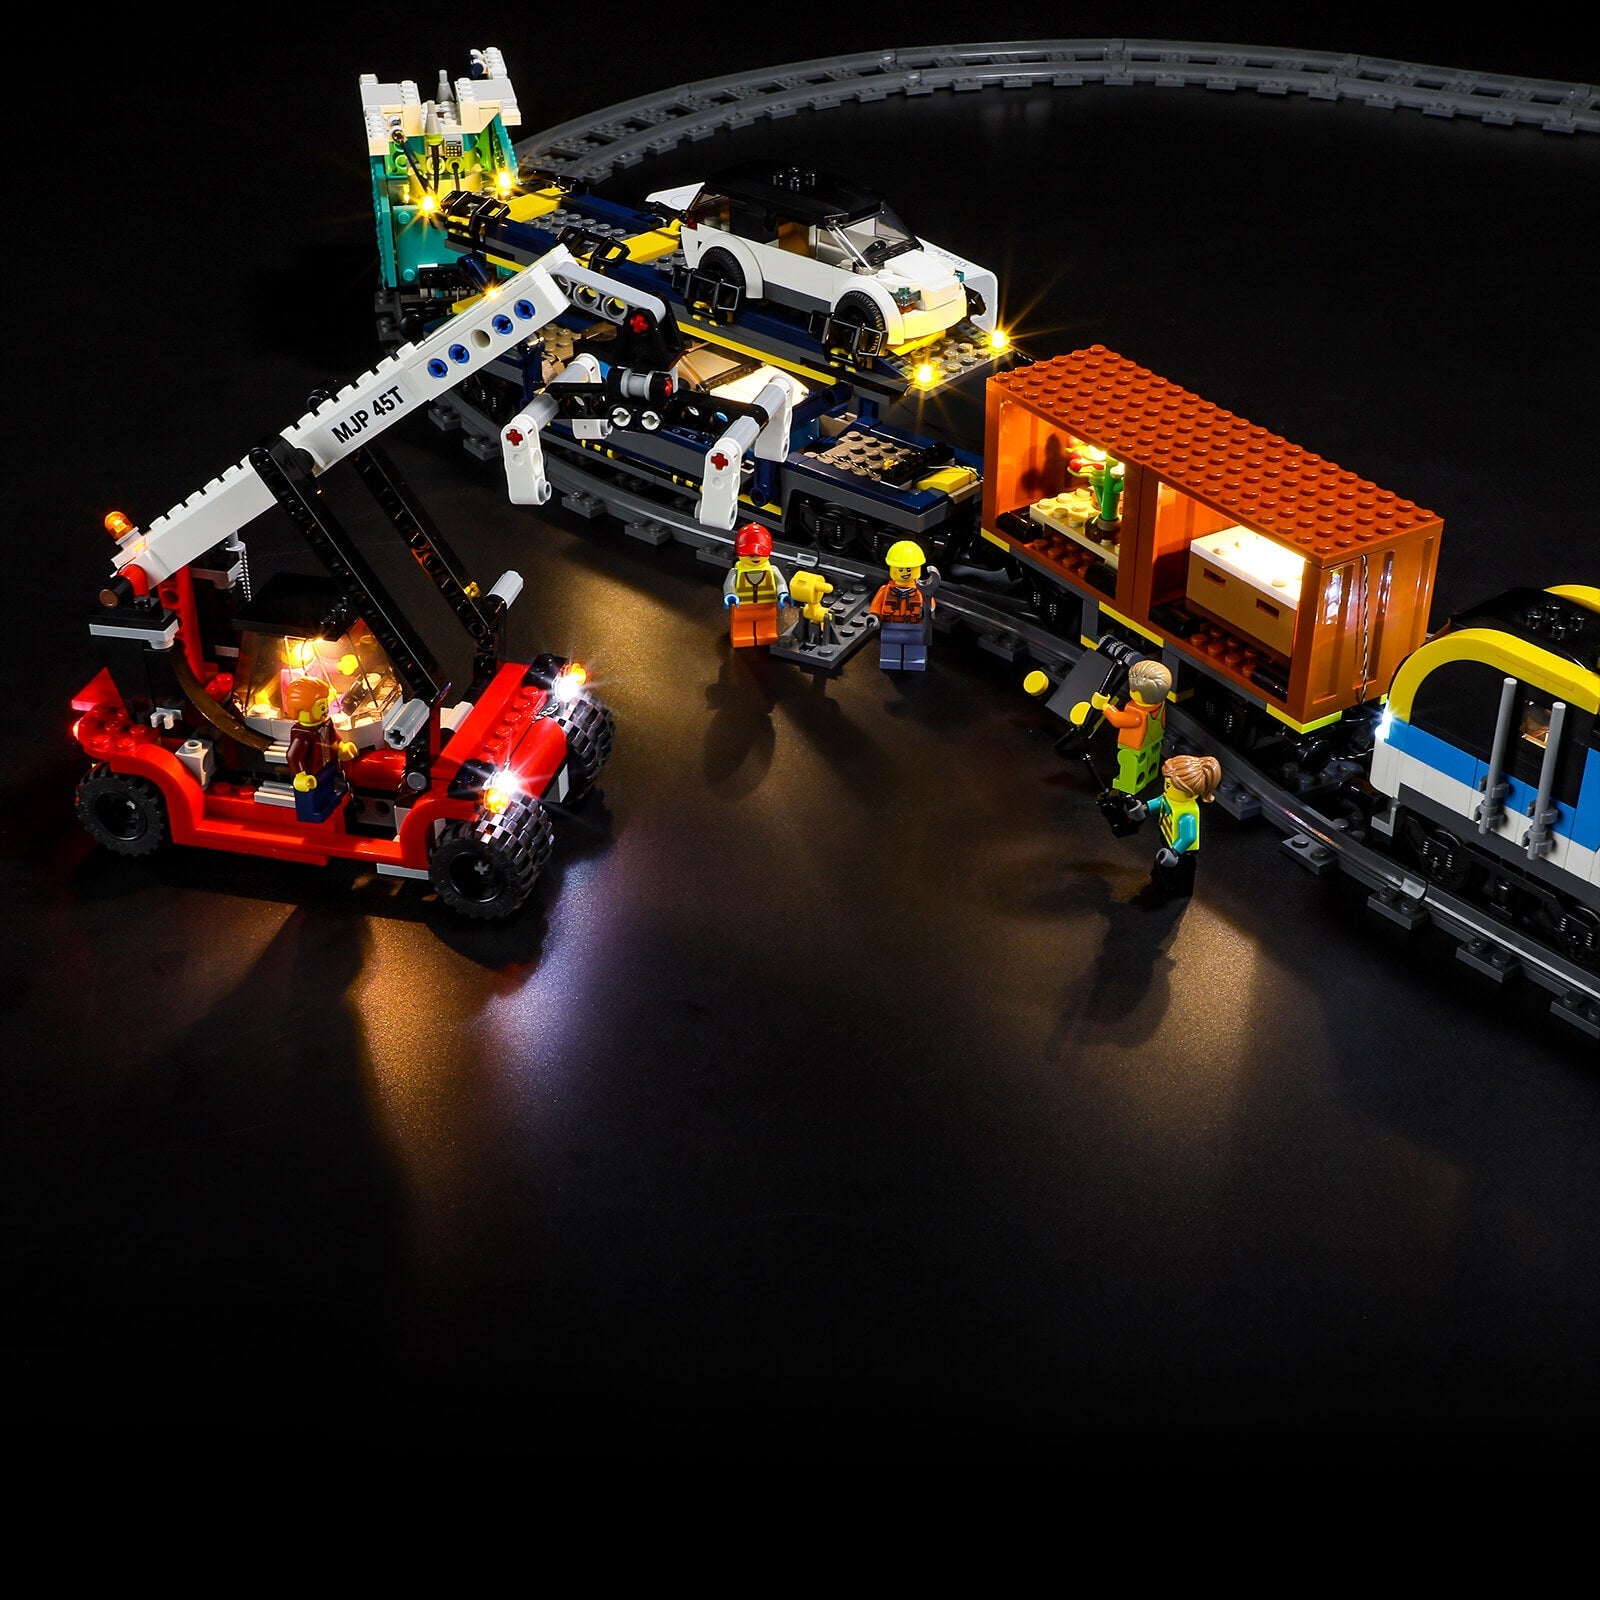 LEGO City 60336 Freight Train detailed review & light upgrade 